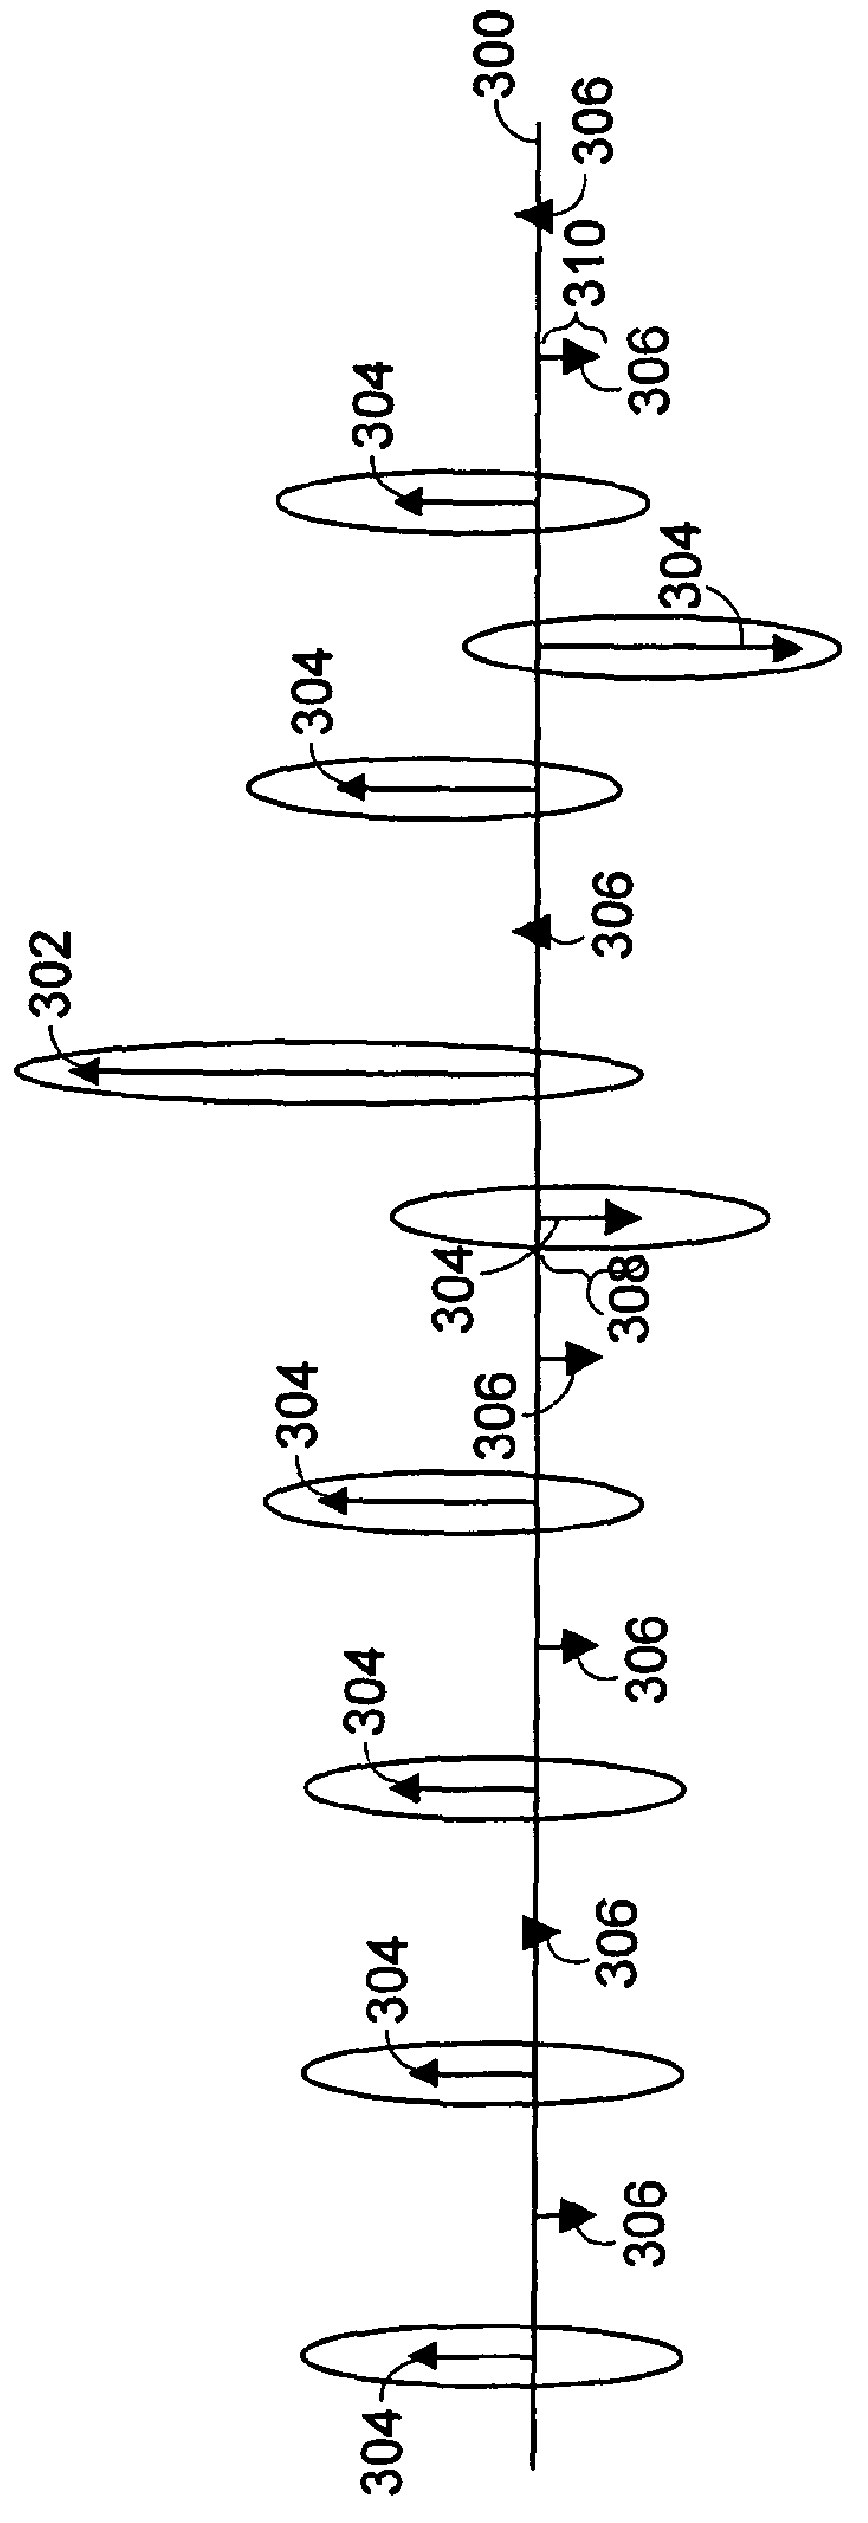 Efficient tapped delay line equalizer methods and apparatus